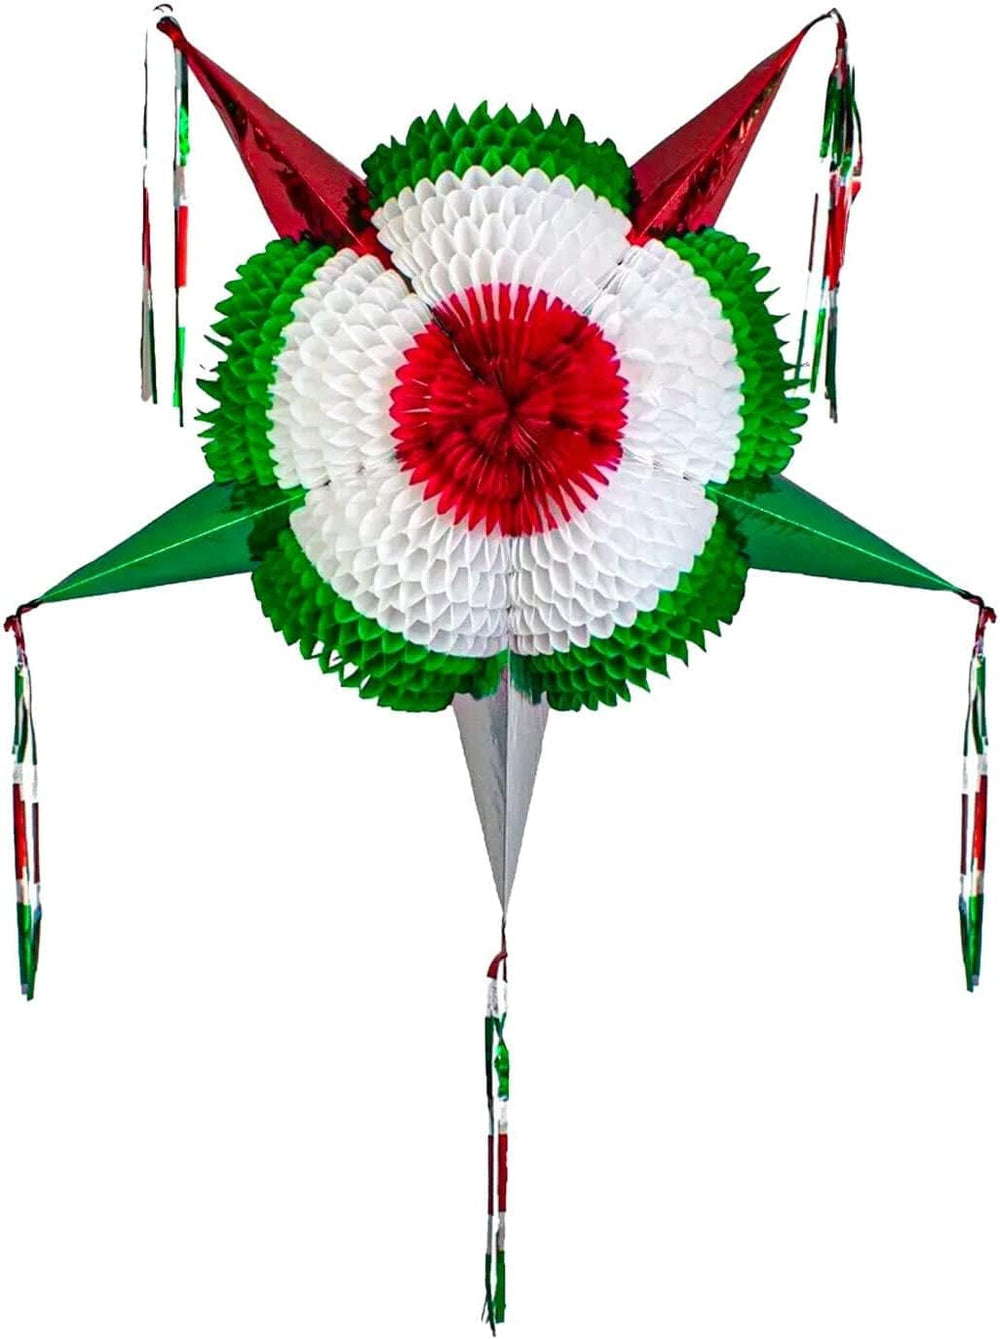 Handmade Mexican Star Decoration, Green, White, Red colors,